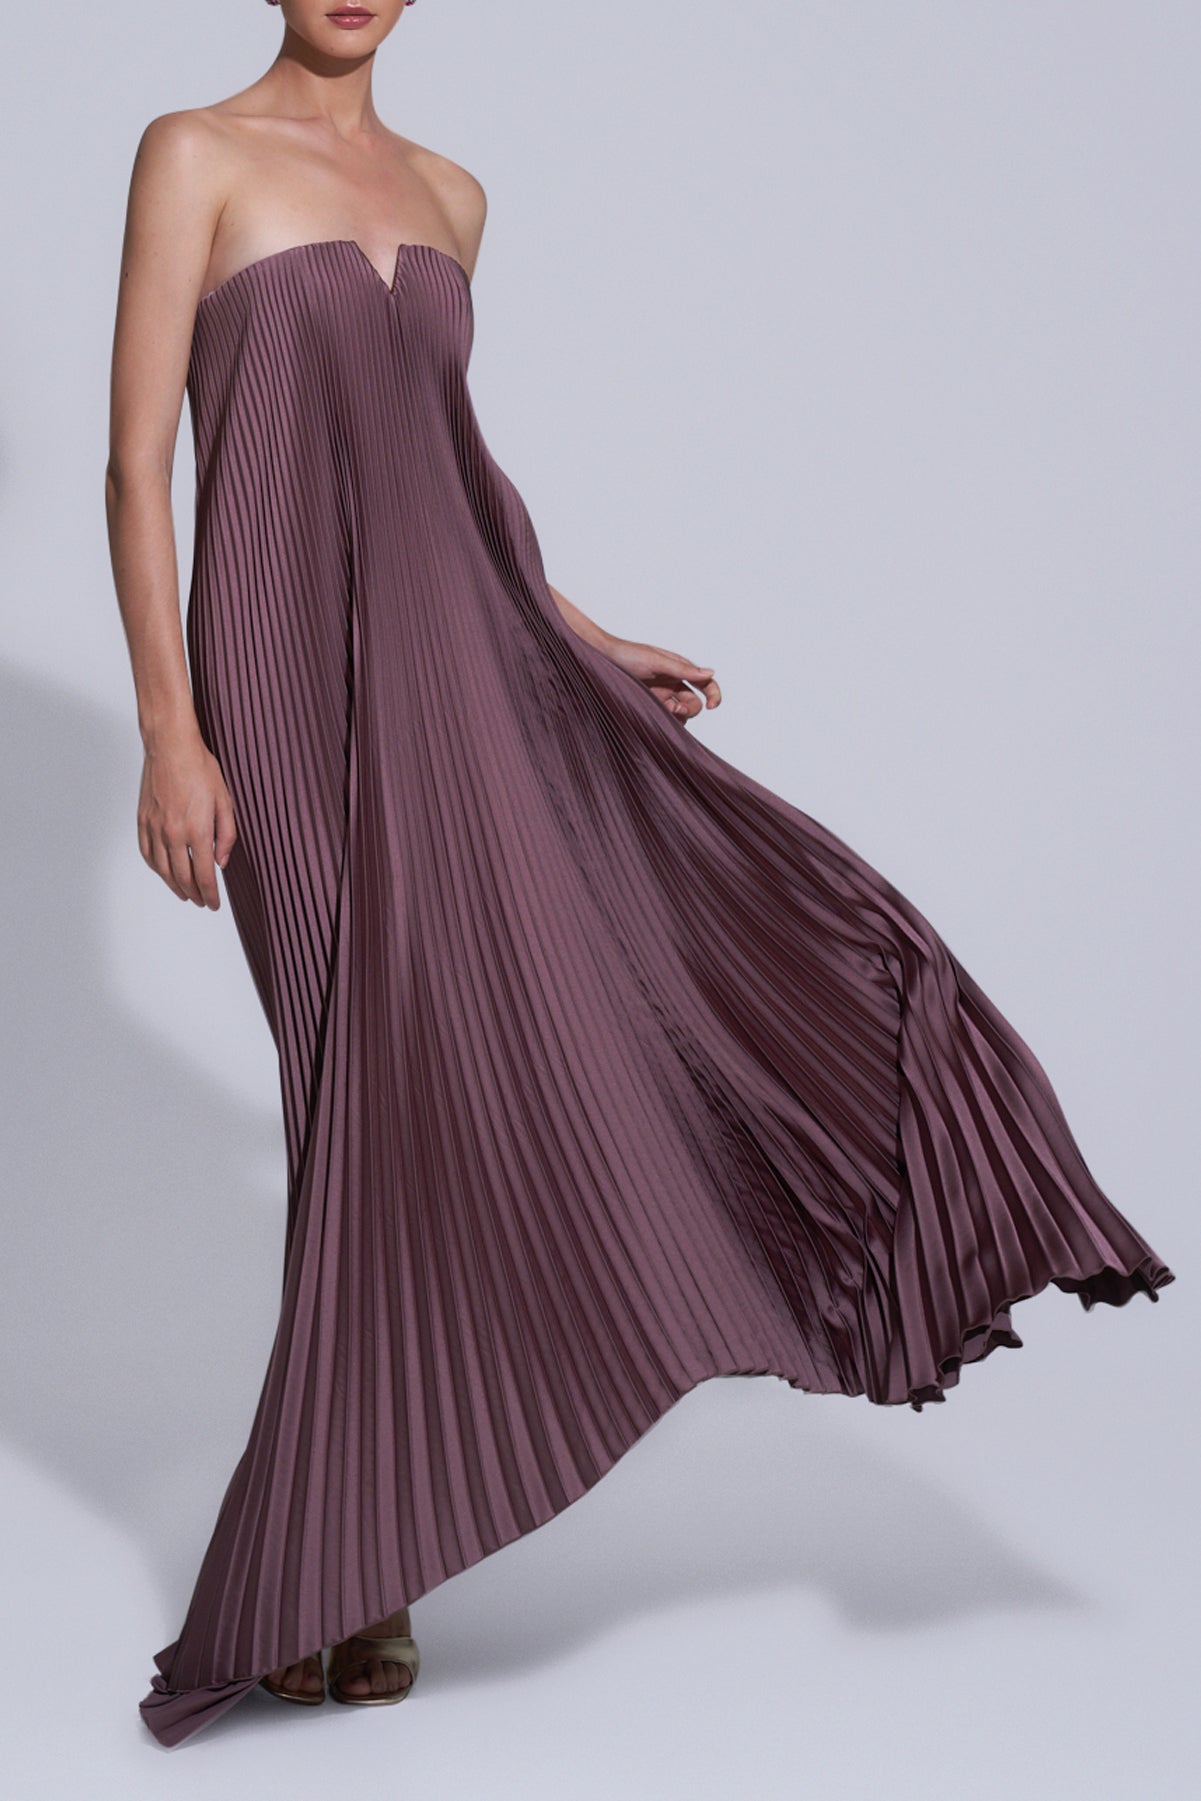 Black Tie Gown - Chocolate